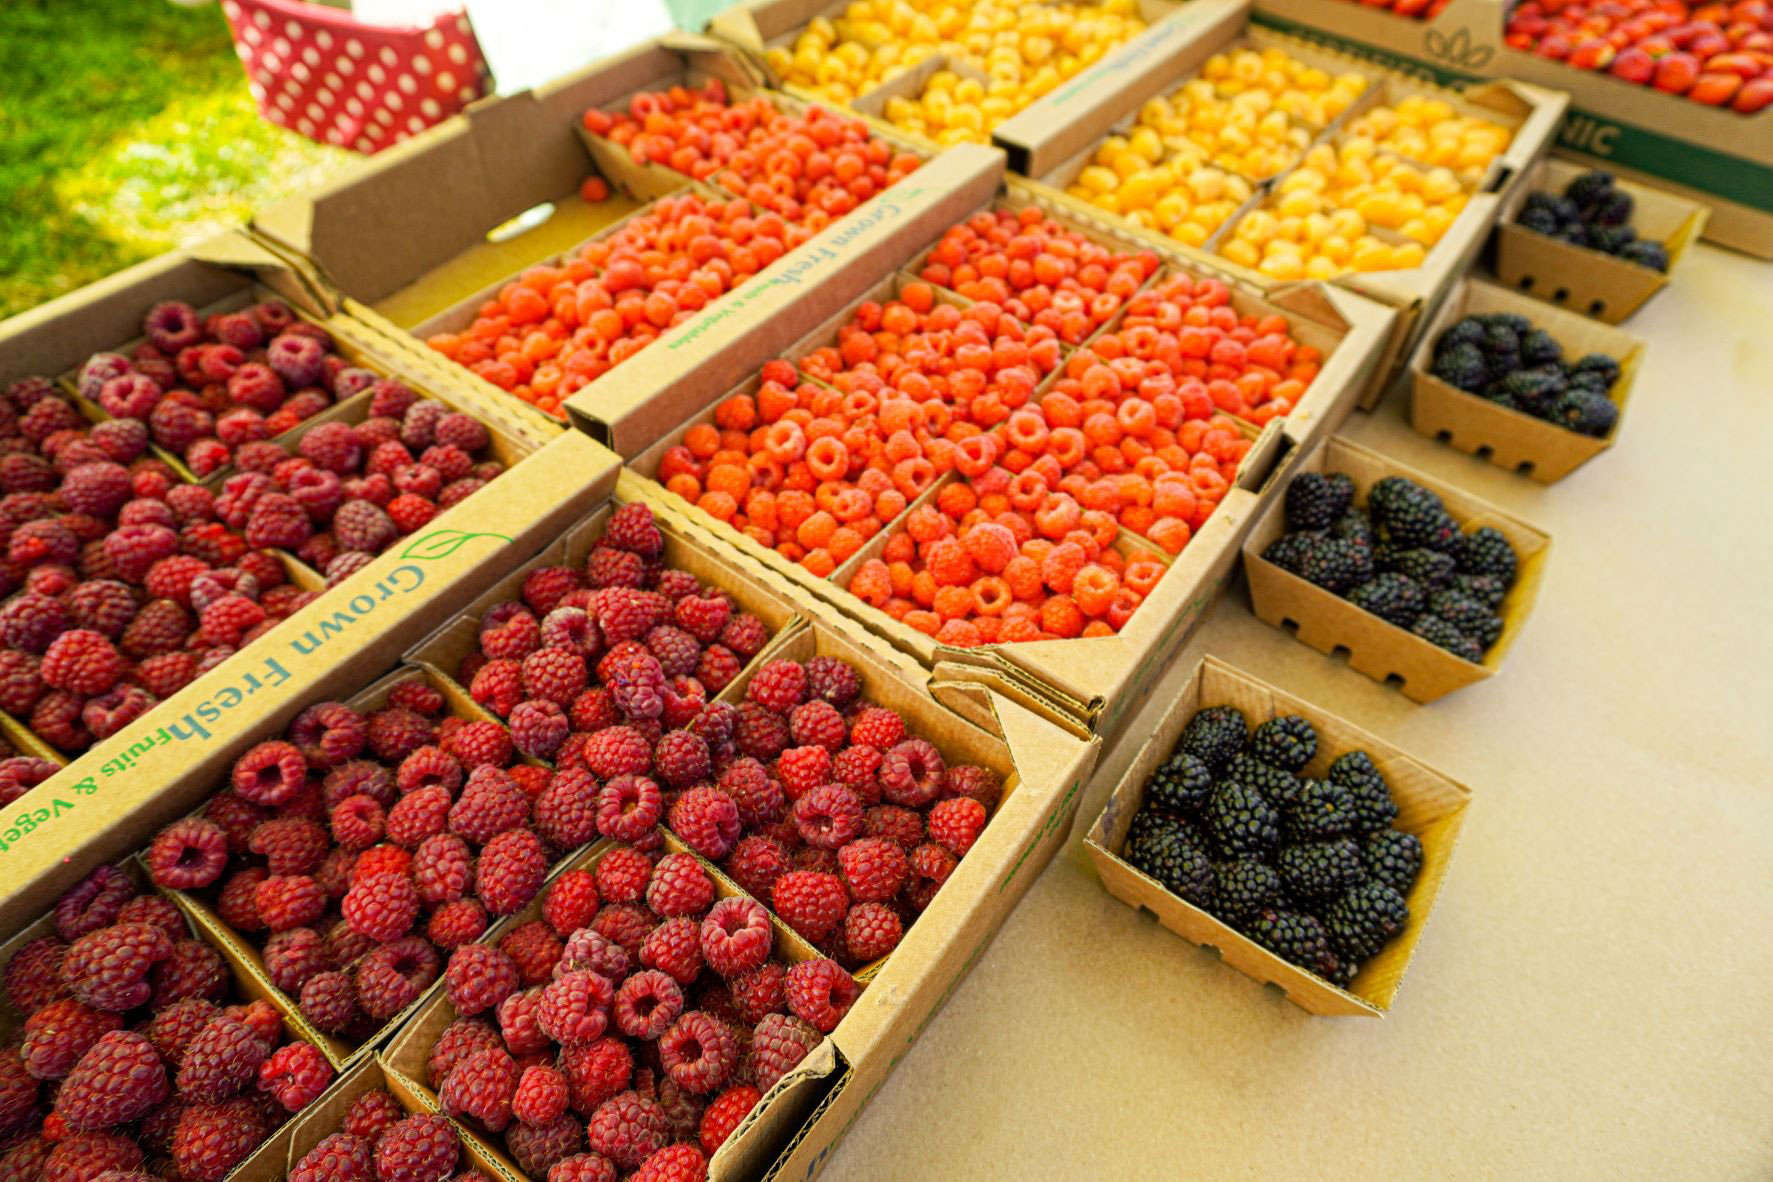 Organic strawberries, peaches, and different colors of raspberries